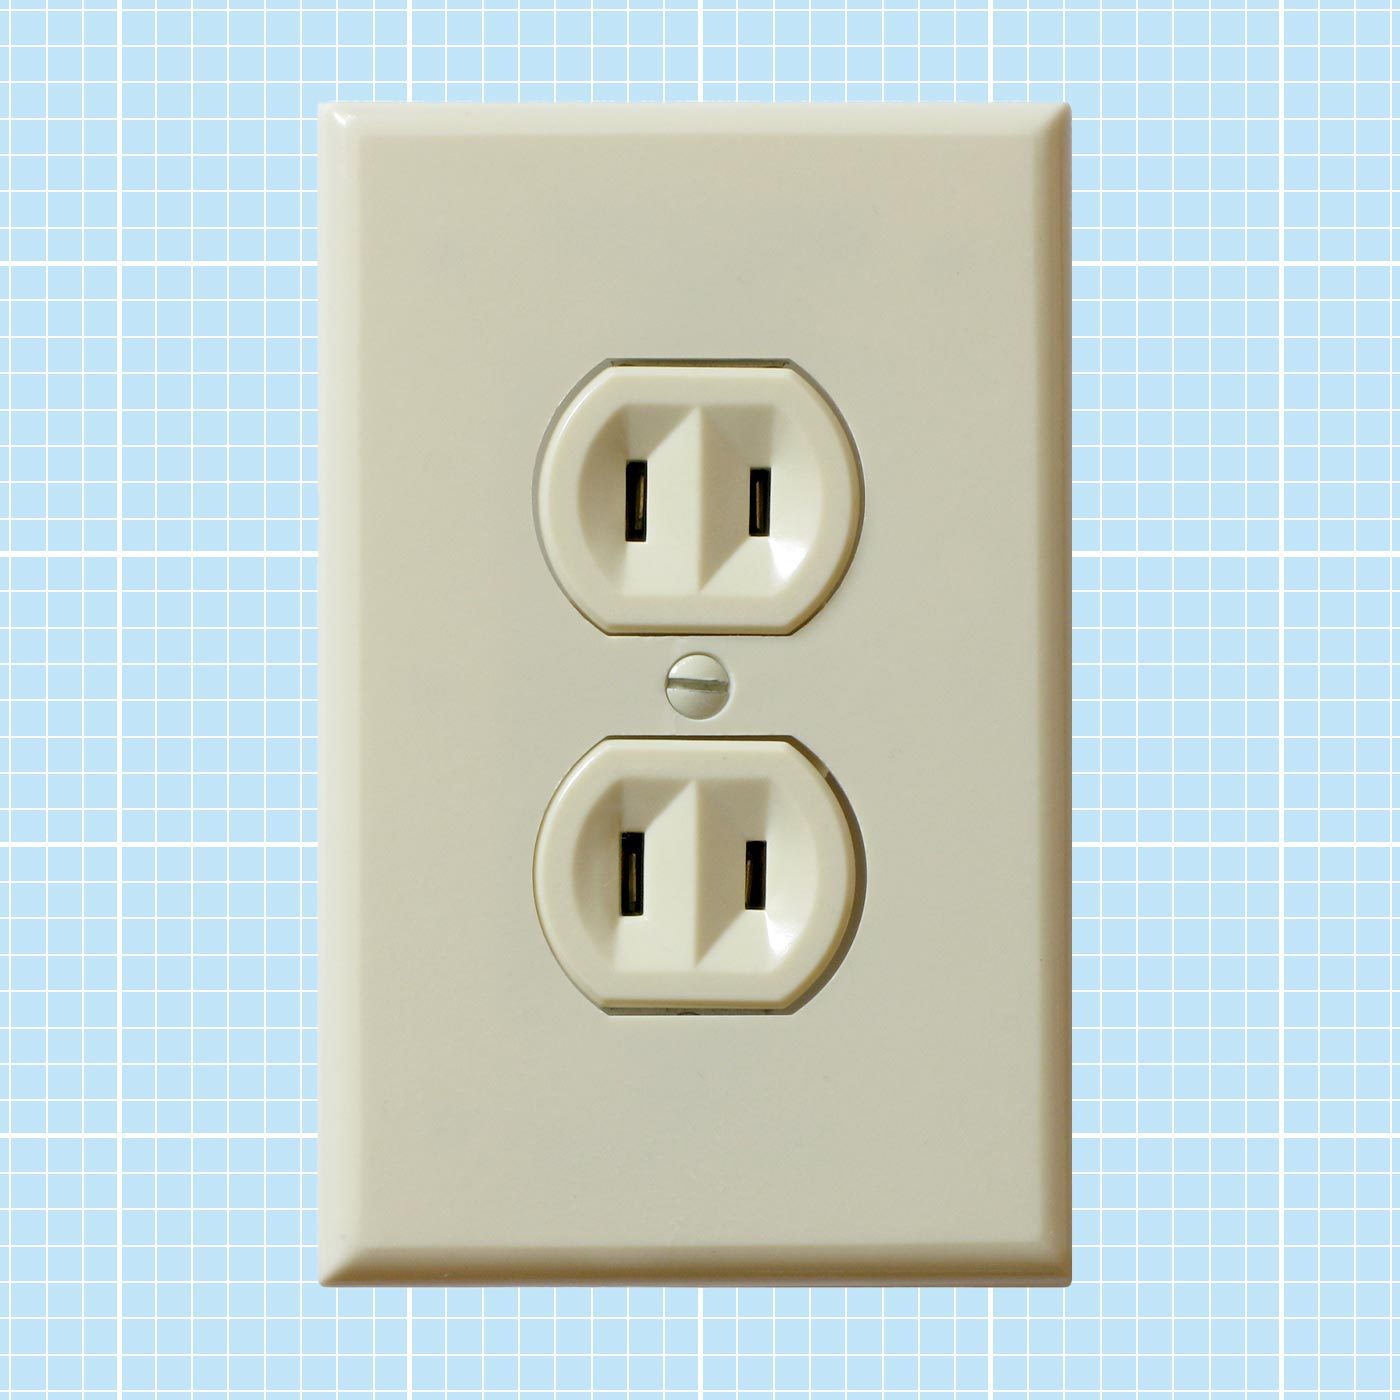 Ungrounded Outlet on a blue grid background